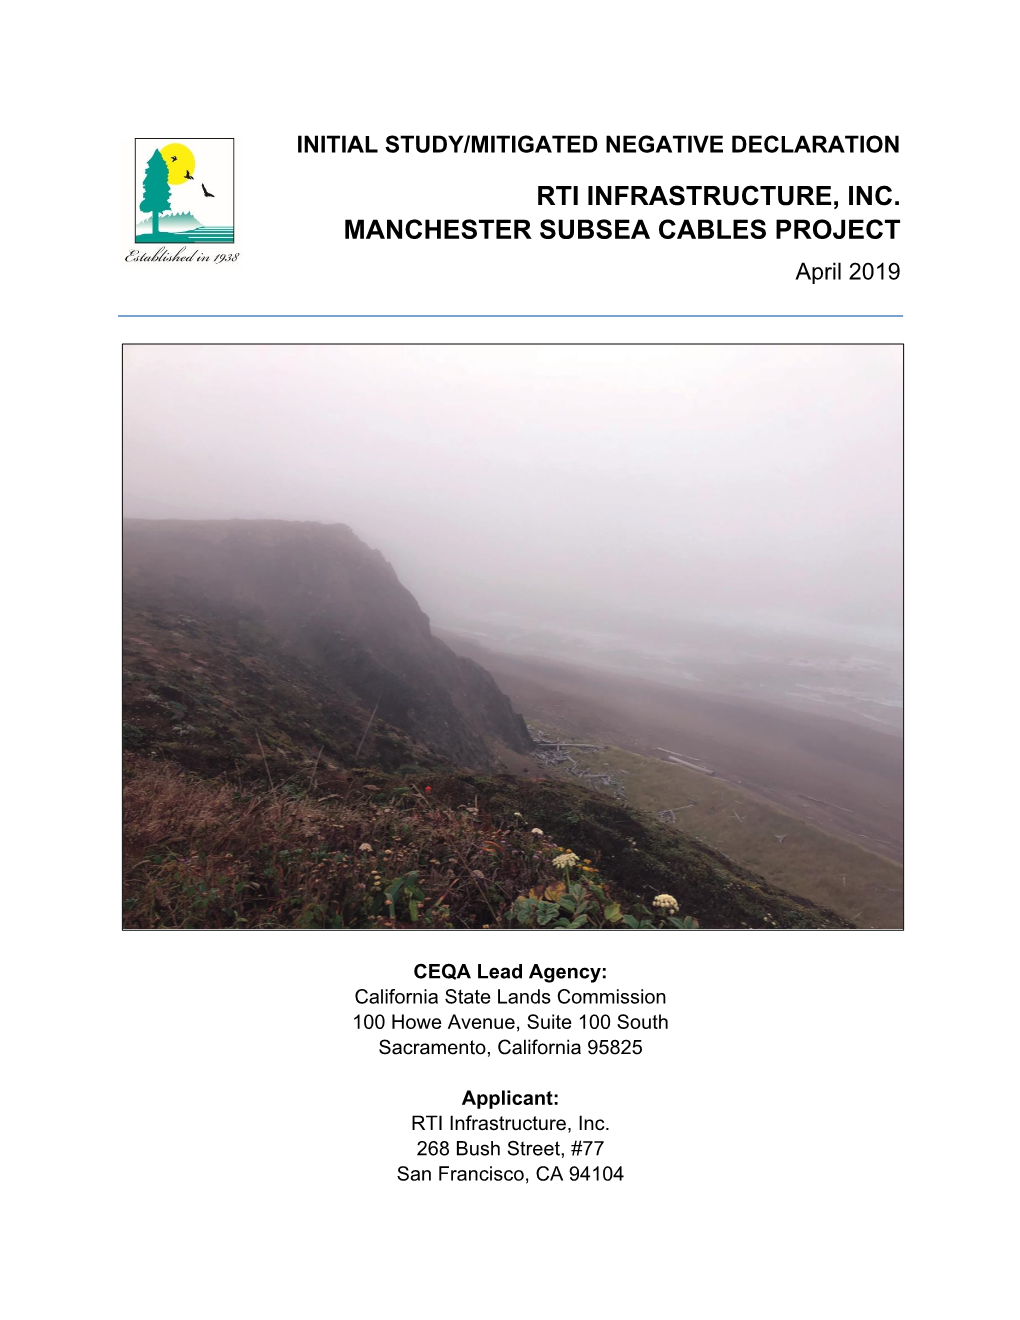 RTI INFRASTRUCTURE, INC. MANCHESTER SUBSEA CABLES PROJECT April 2019